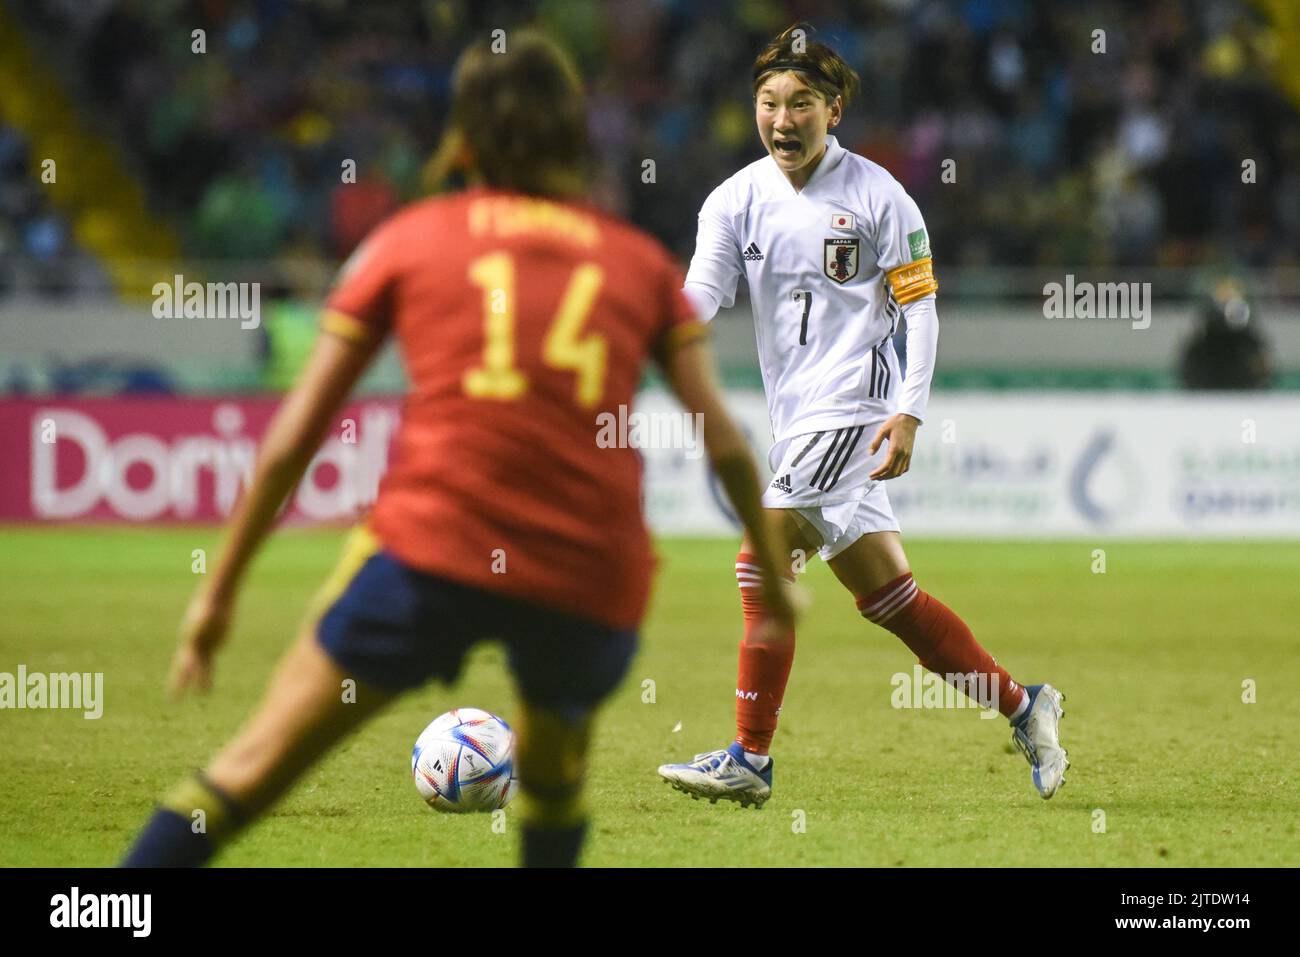 SAN JOSE, Costa Rica: Japan player Mihoshi SUGISAWA (7) in action during the final match played between Spain and Japan for the champions trophy at th Stock Photo